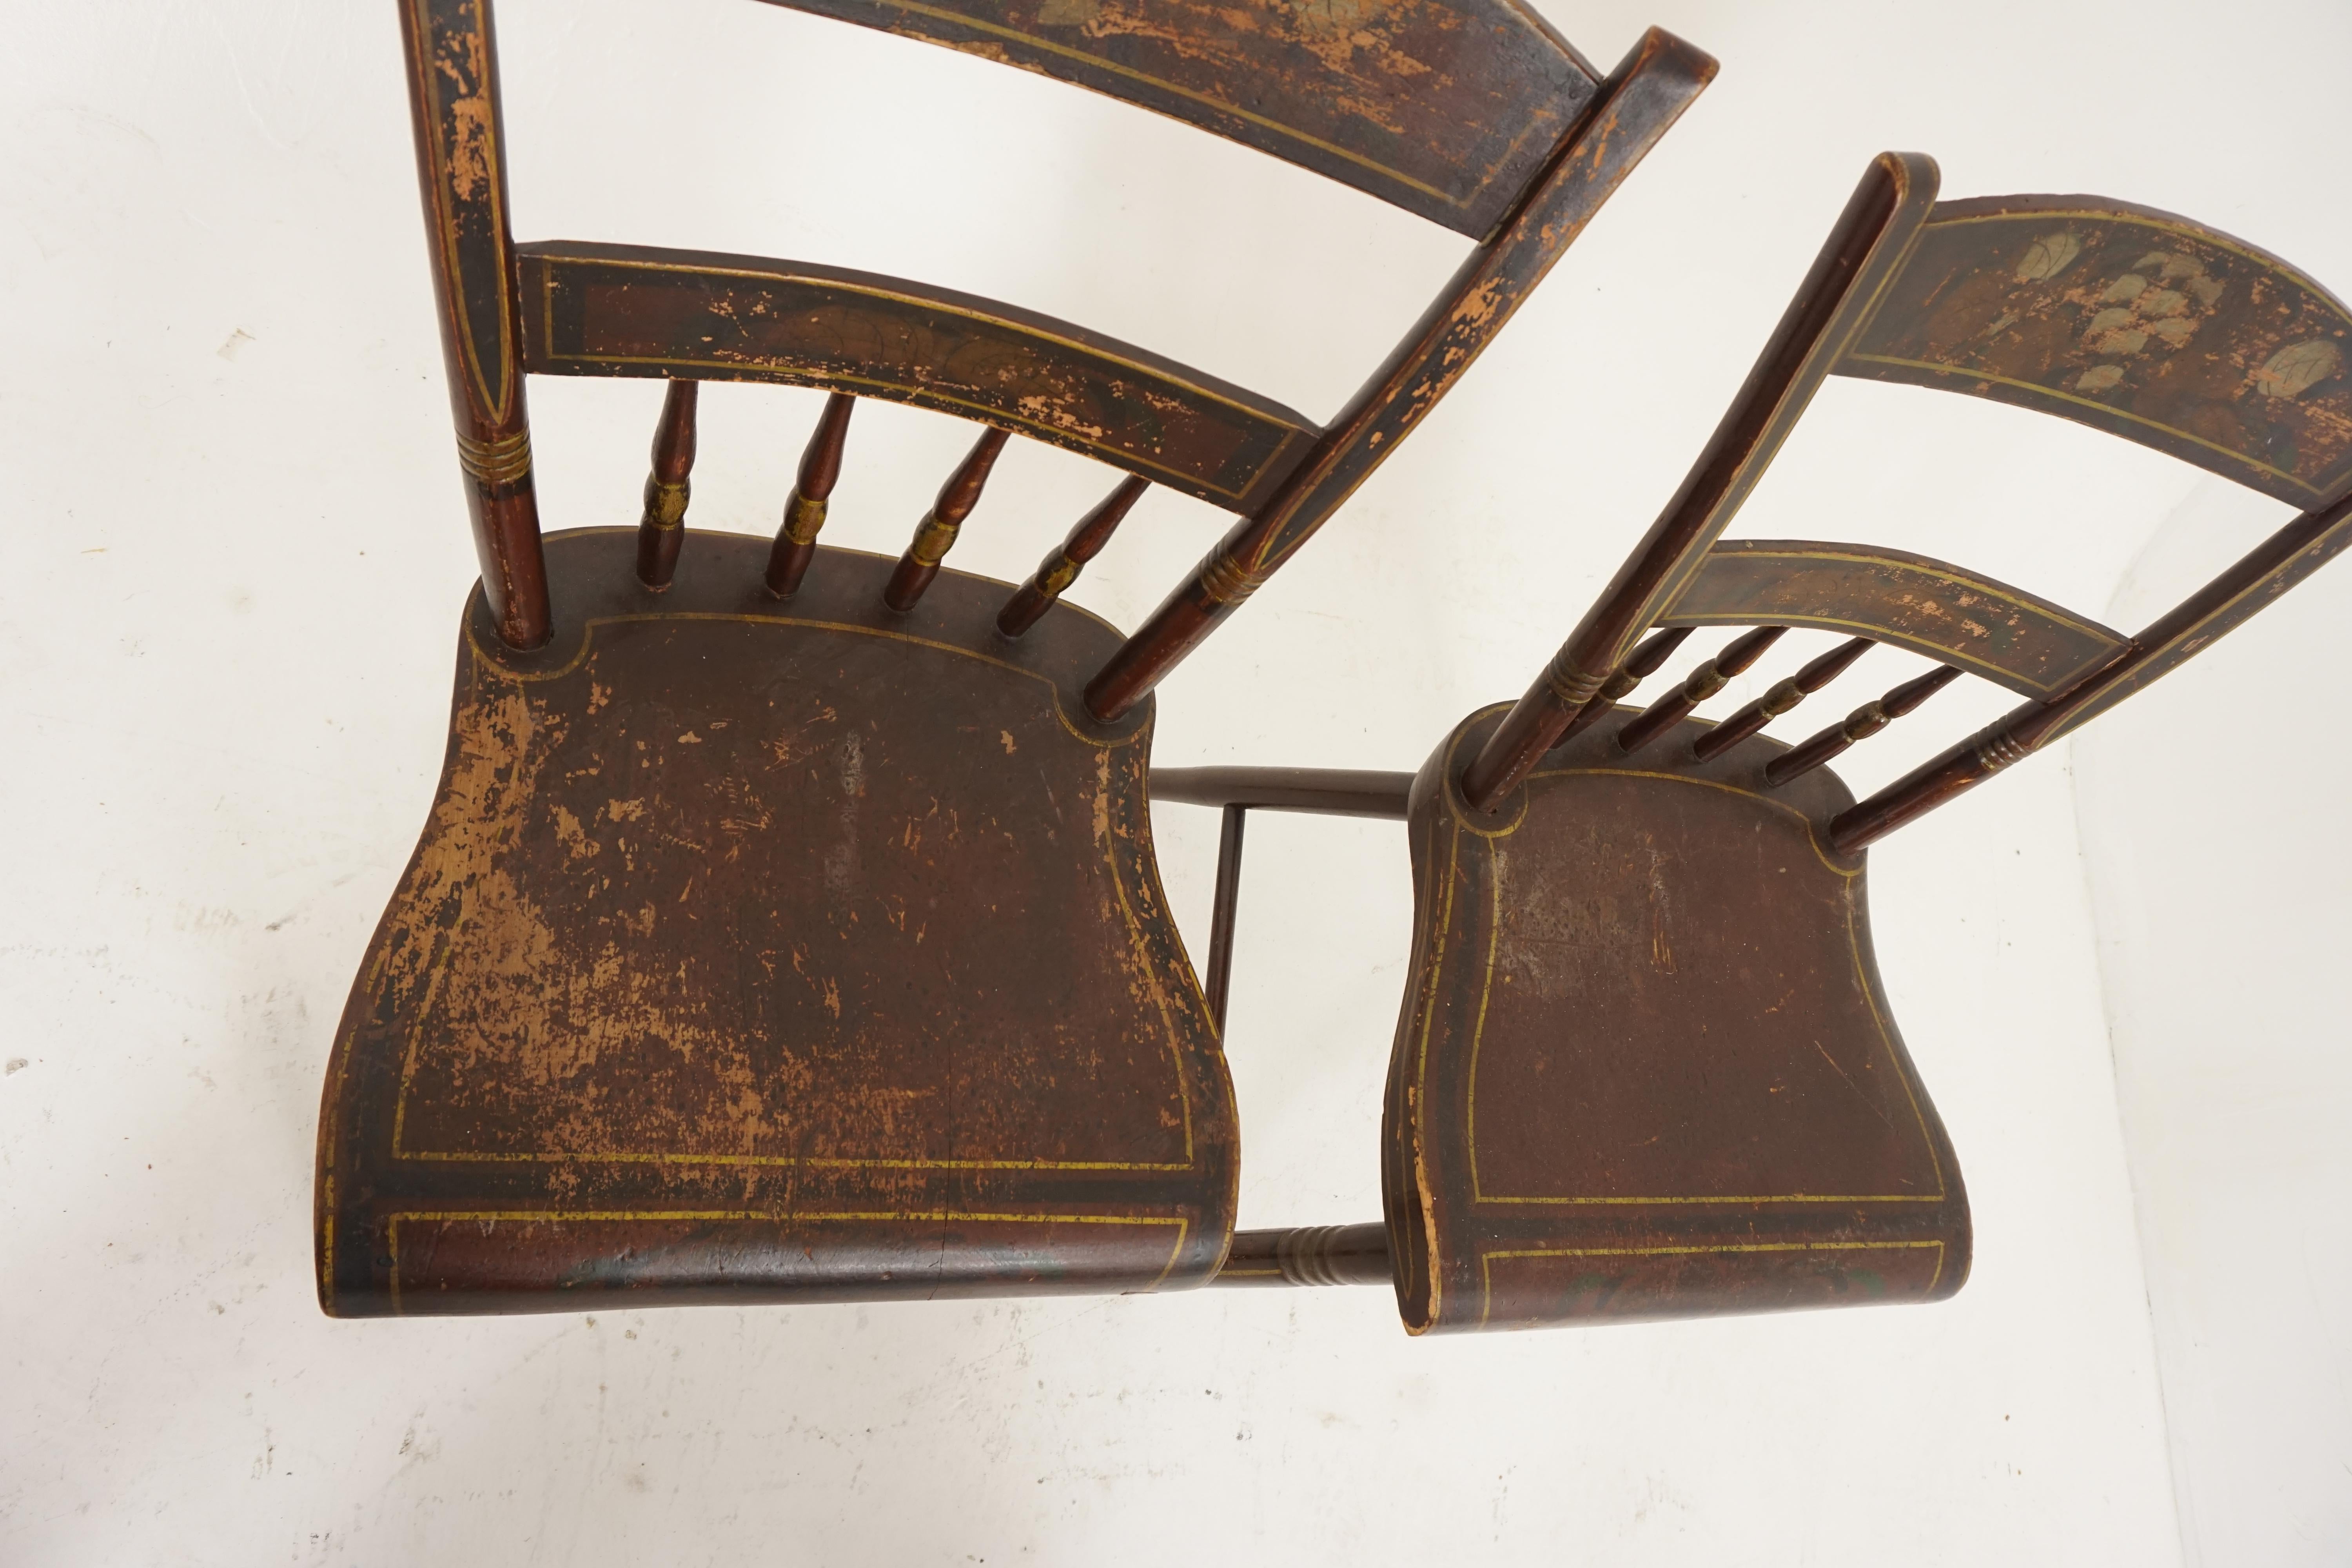 Late 19th Century Antique Chairs, Set of 6, Pennsylvania Dutch Painted Plank Bottom Chairs, 1890s